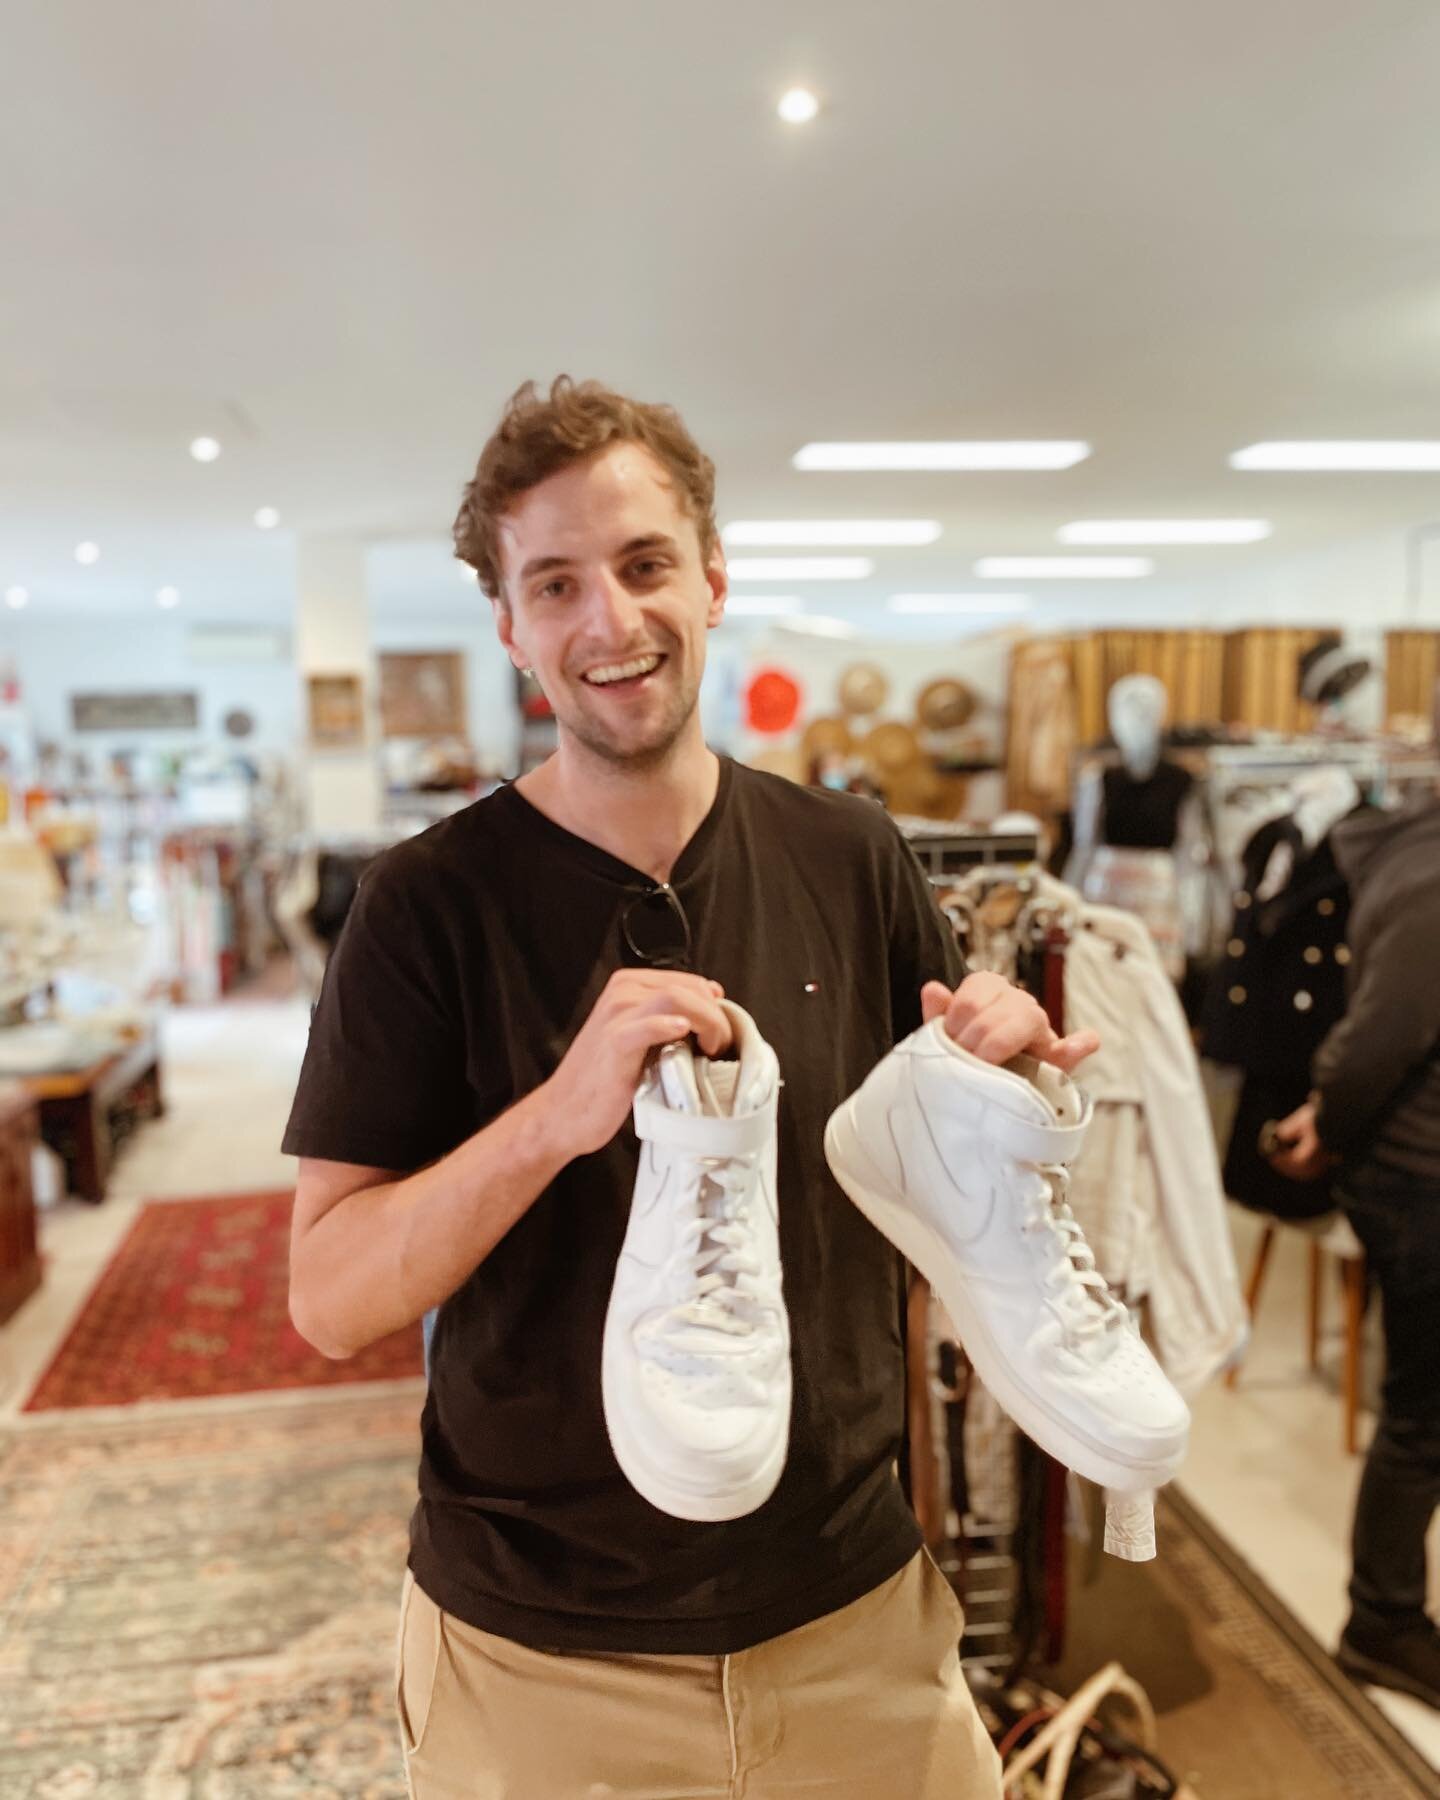 When you get a nearly new pair of Nike&rsquo;s in-store, take all the photos for insta, edit them, put them out &amp; they sell straight away! 

I told Tom that if he wanted them, he&rsquo;d have to get a photo with them.😜

Thanks for coming in &amp